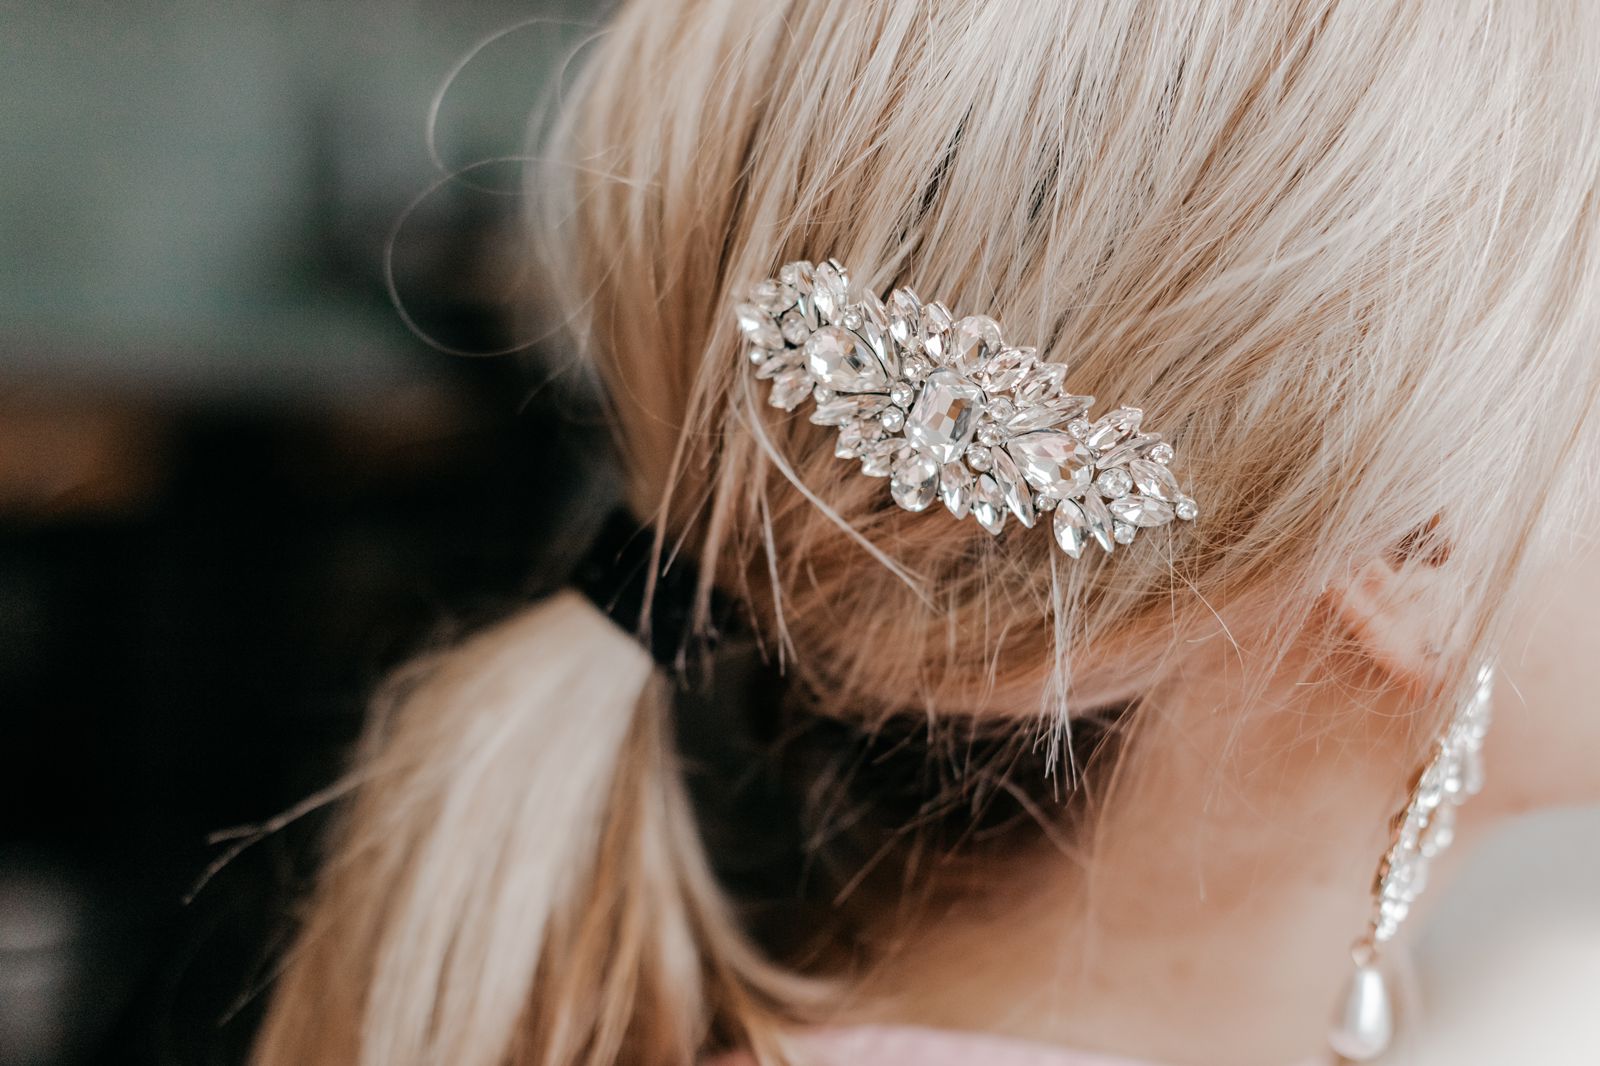 THE SILVER LINING HAIR PIN